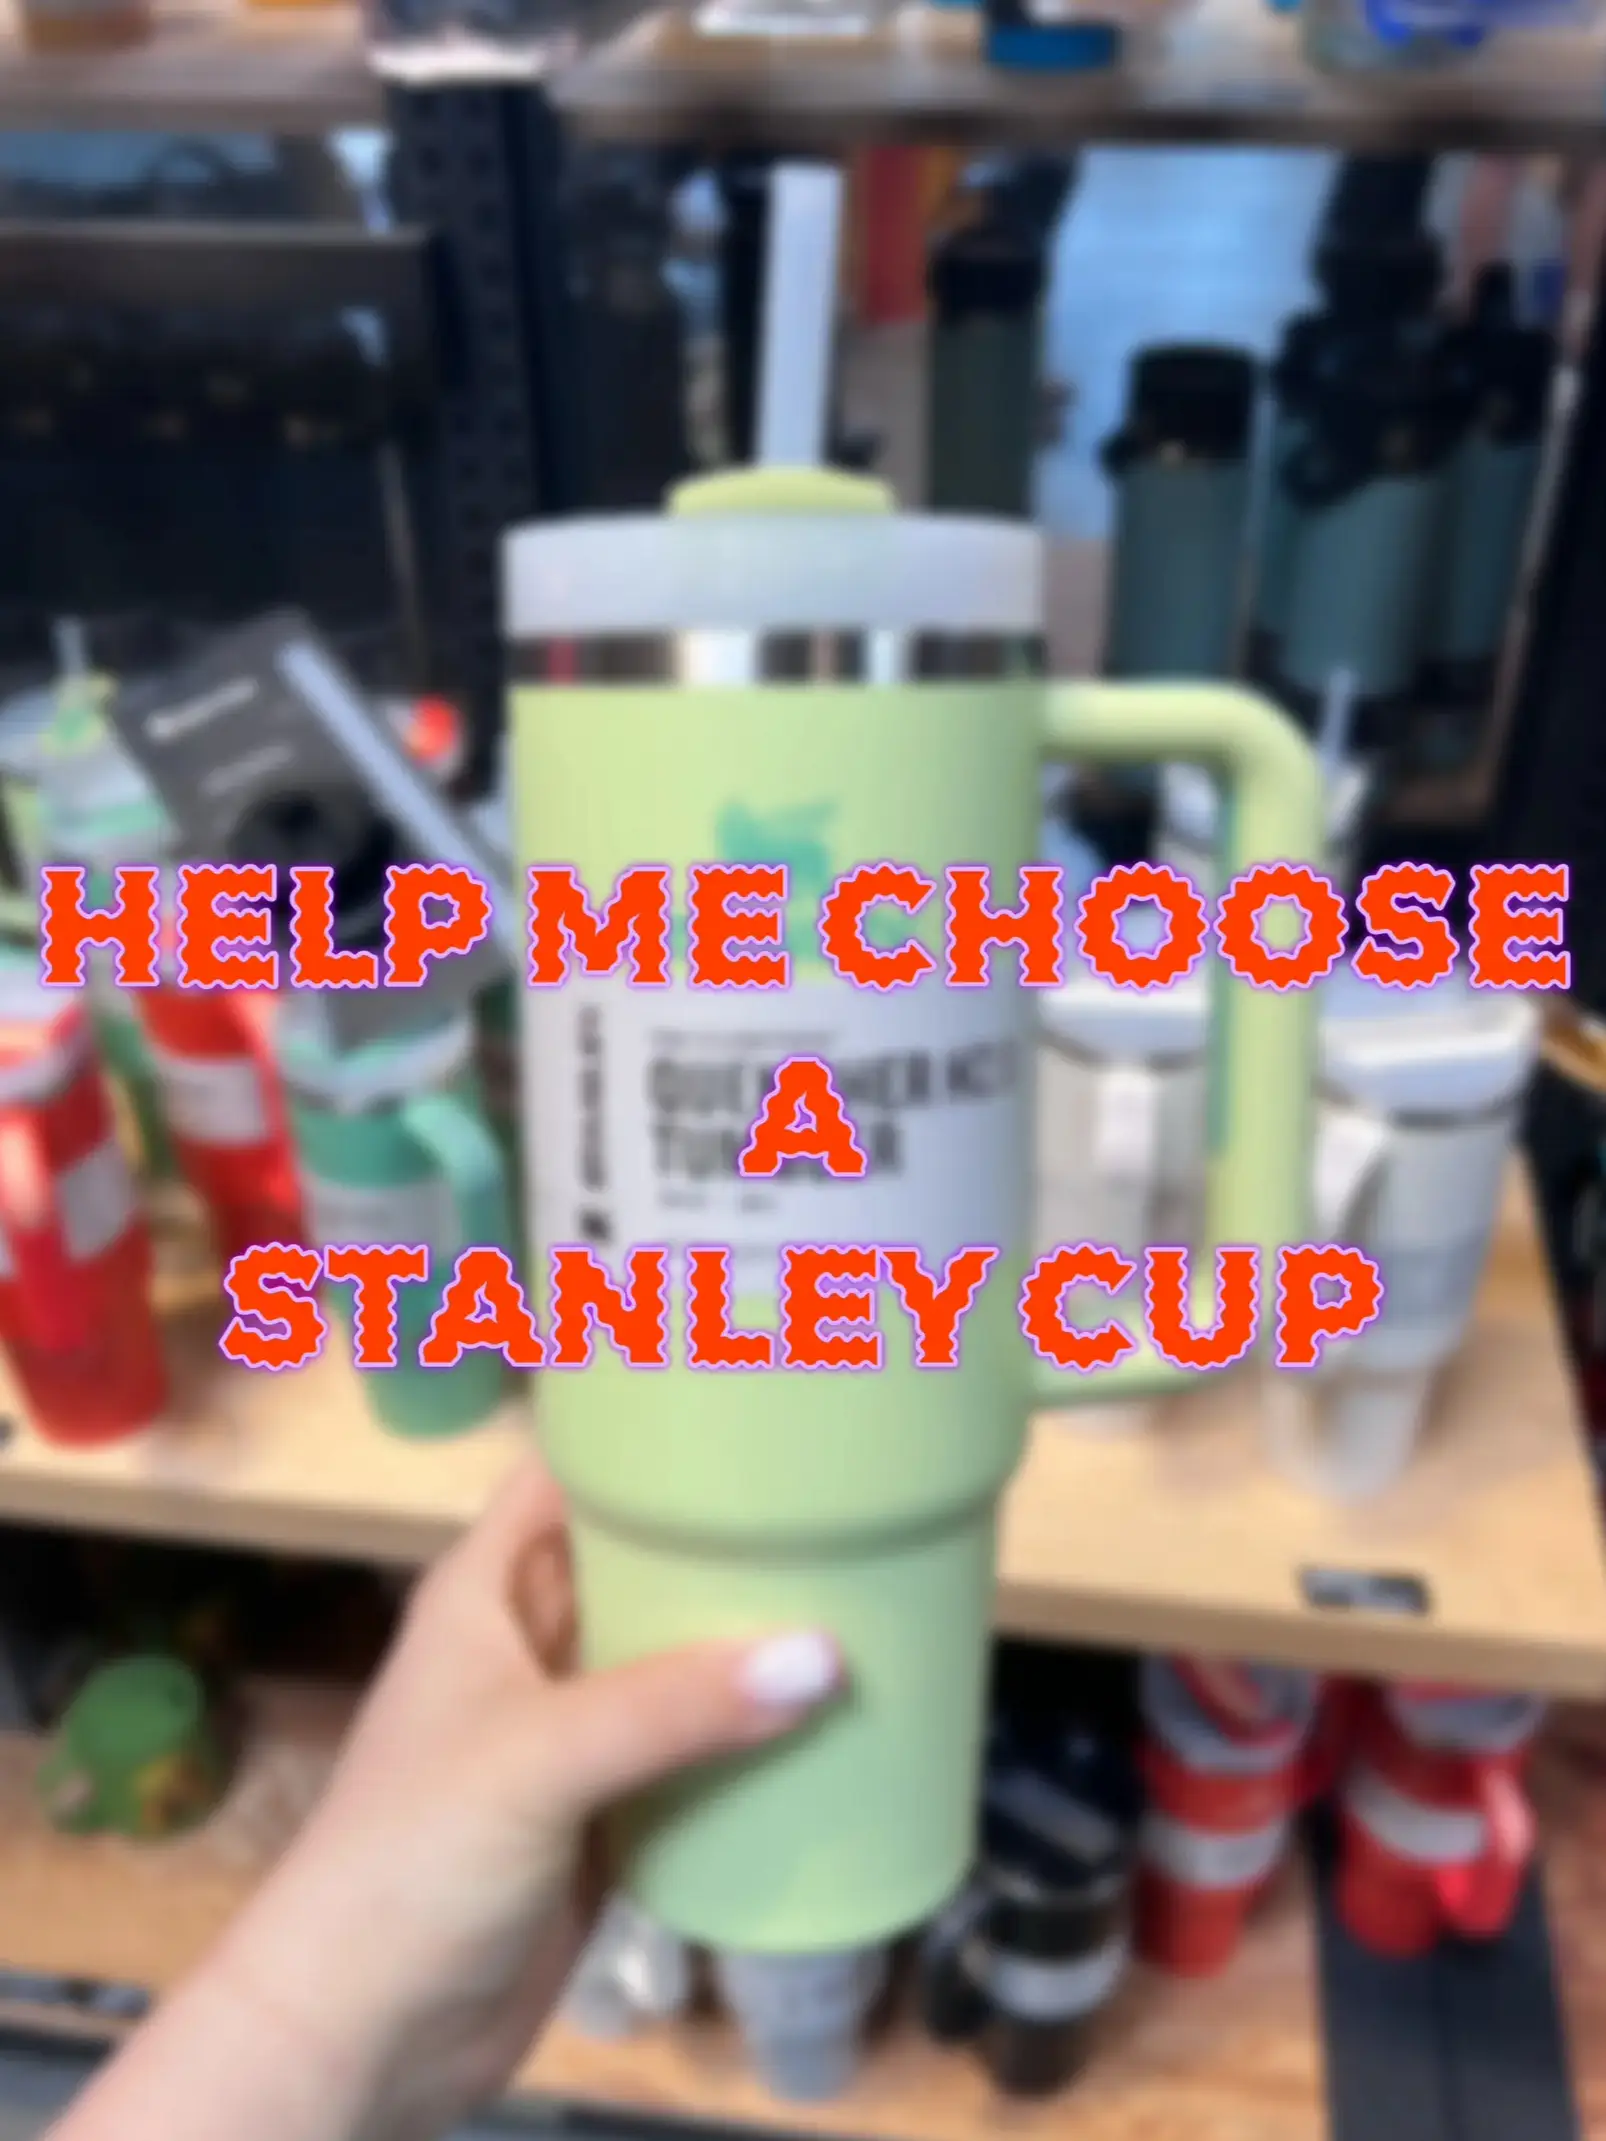 Come with me as I put stickers on my #stanleycup! #stanley